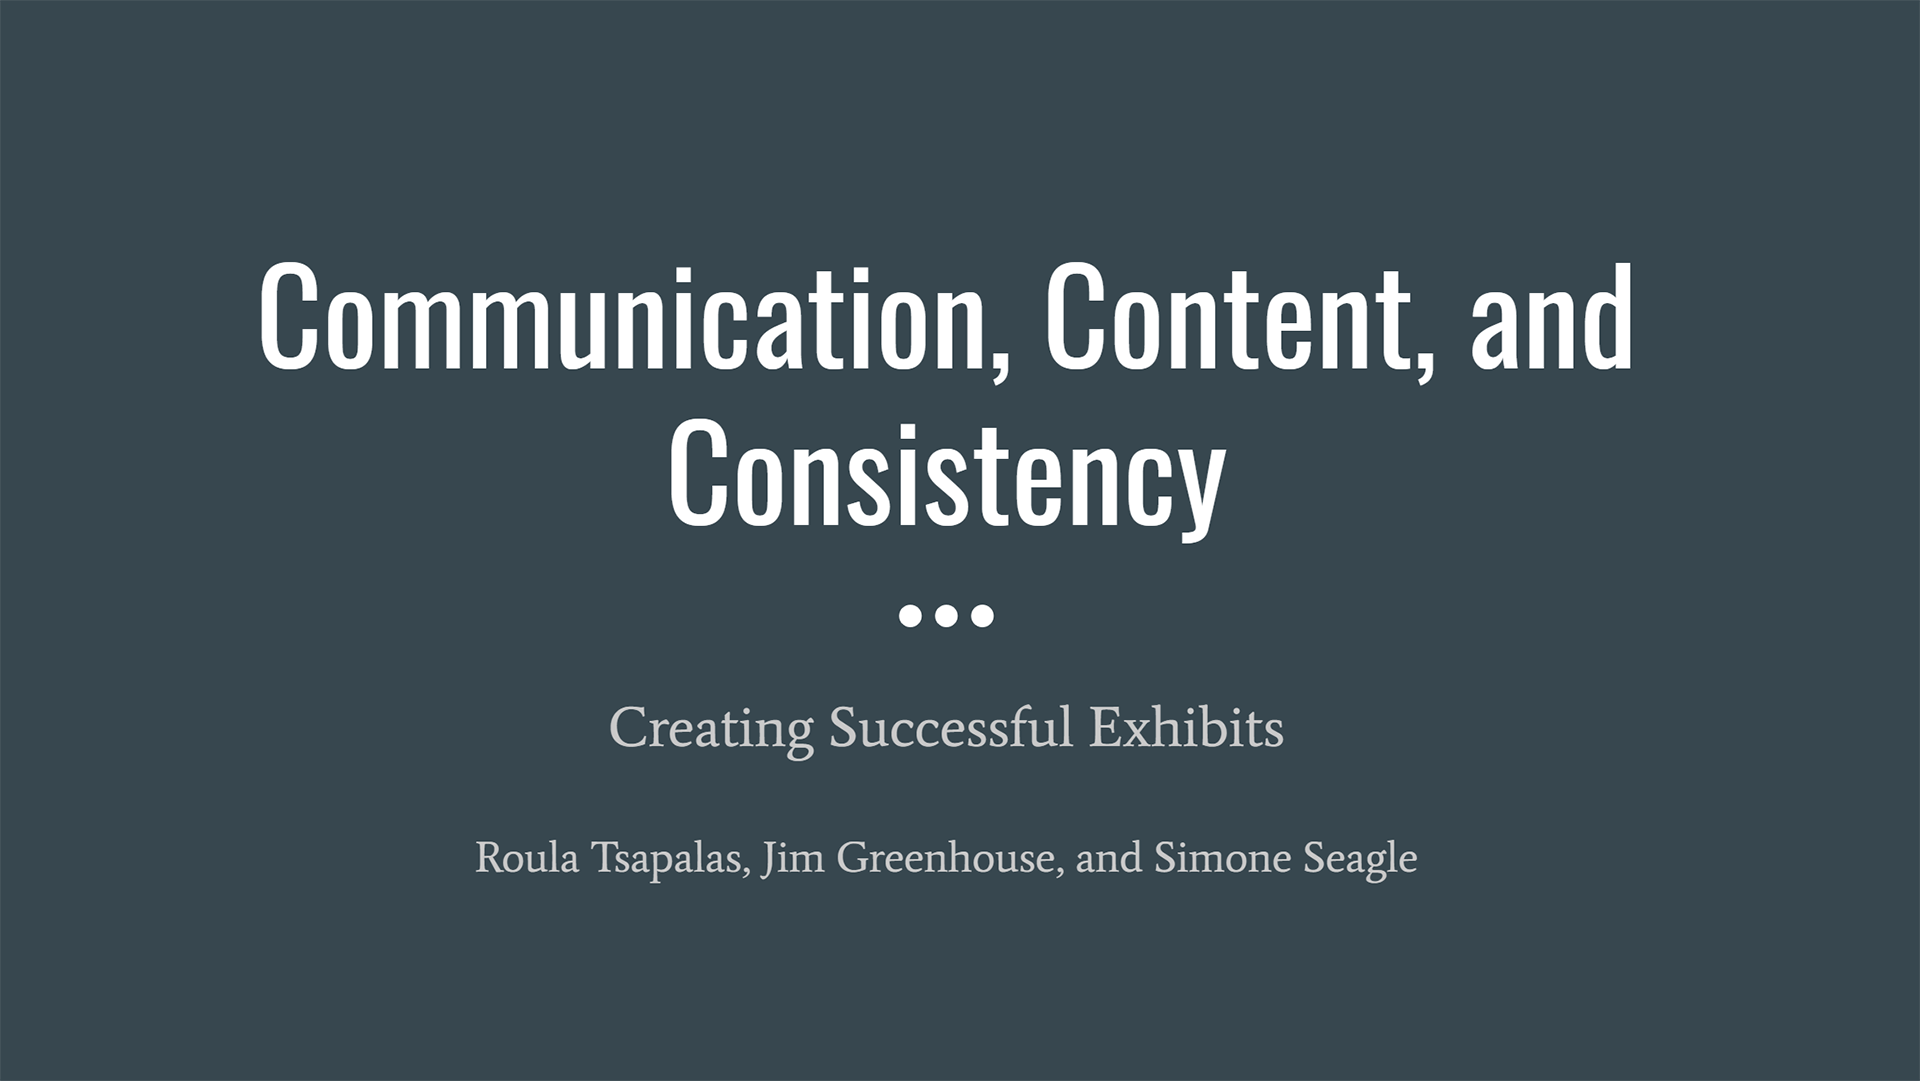 Communication, Content, and Consistency | Tangerine Development